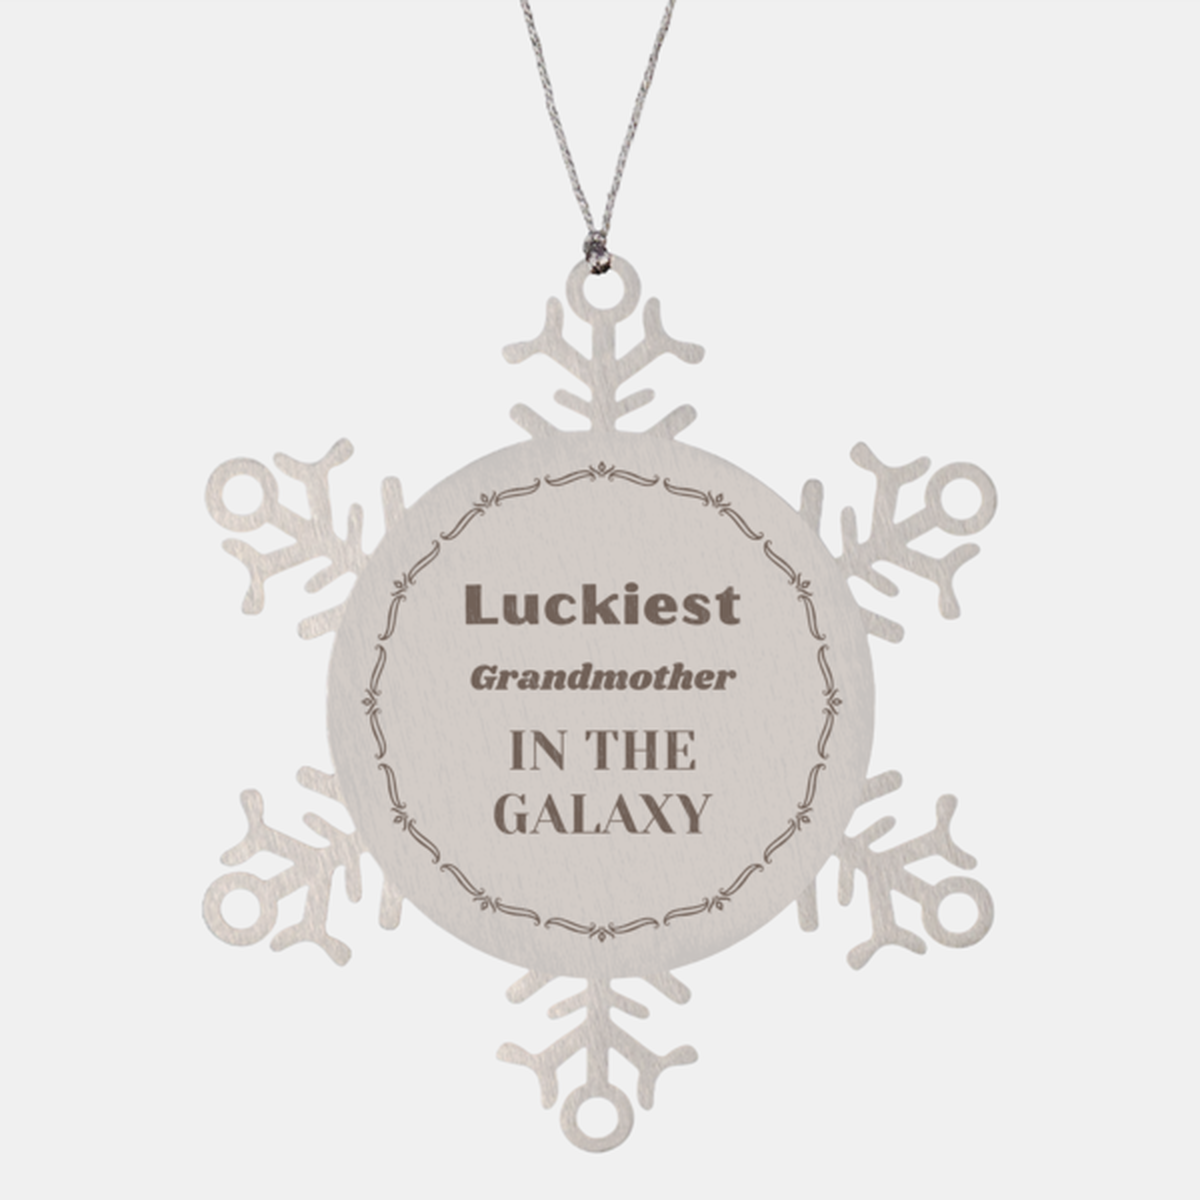 Luckiest Grandmother in the Galaxy, To My Grandmother Ornament Gifts, Christmas Grandmother Snowflake Ornament Gifts, X-mas Decorations Unique Gifts For Grandmother Men Women